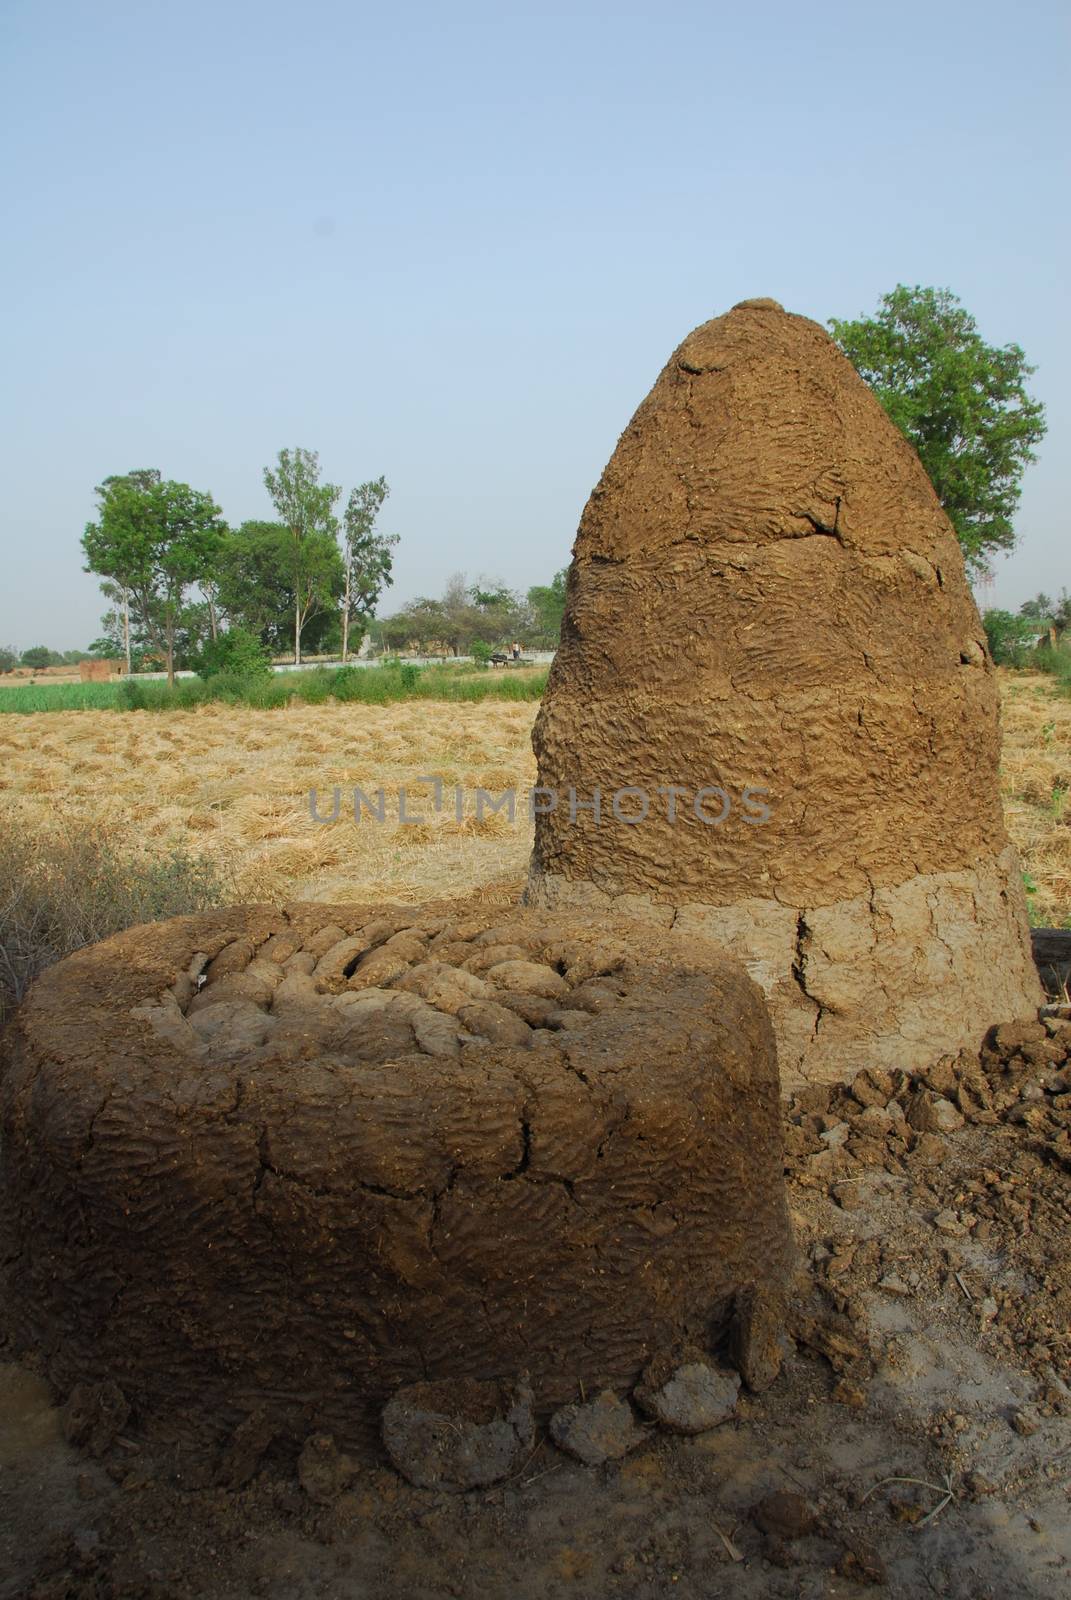 cow dung cake dried to use as fuel in india and other villages in asia